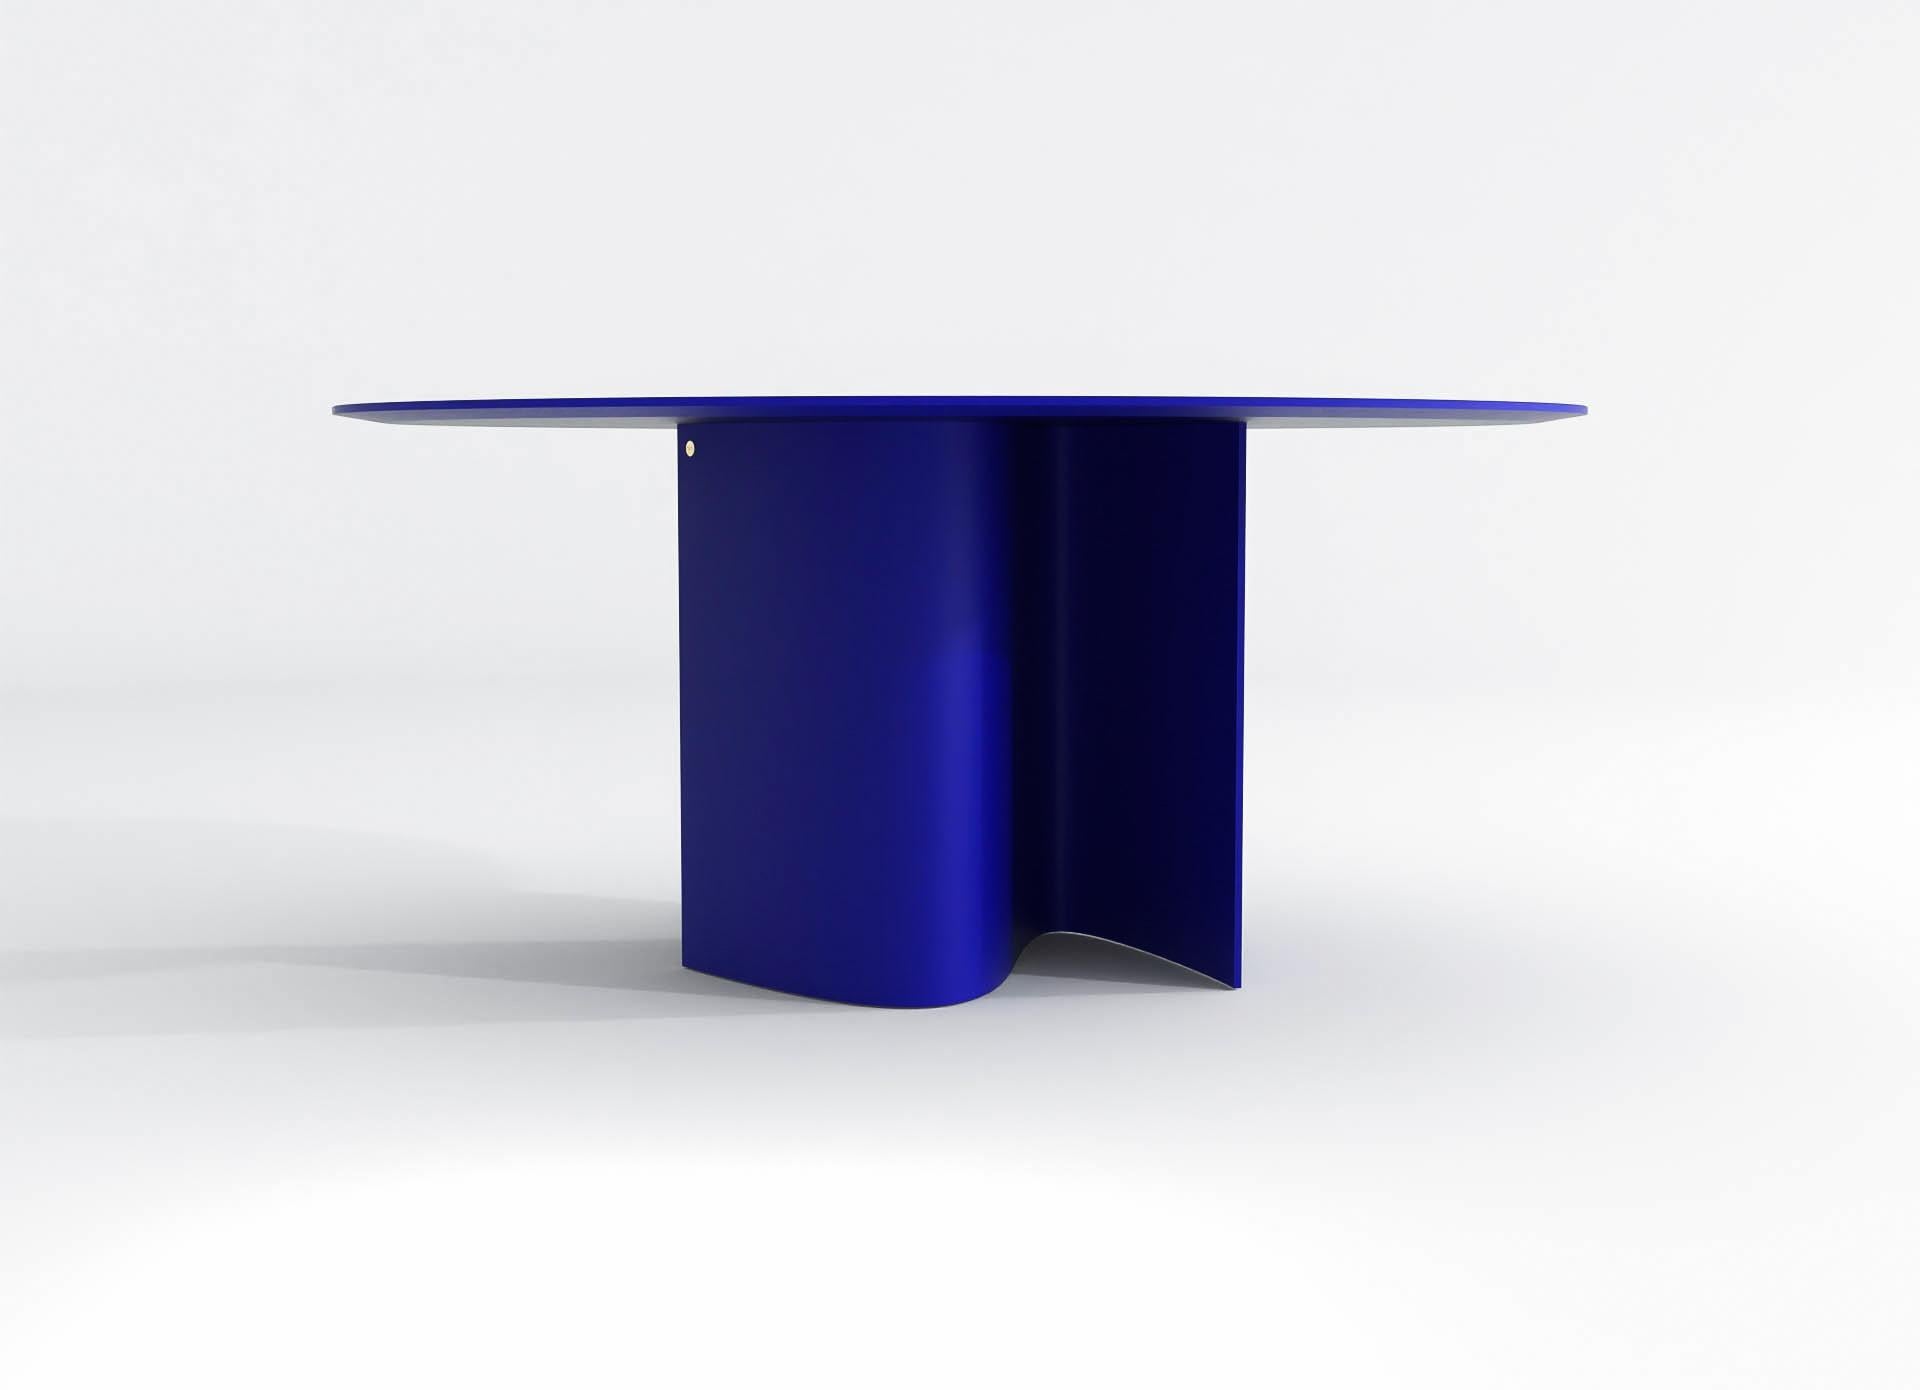 barh wave table is designed with a contrasting design language. The wavy base supporting a rigid and static table top creates a powerful piece of furniture.
The metallic aspect of the wavy base plays with light and shadows, feeding curious minds.